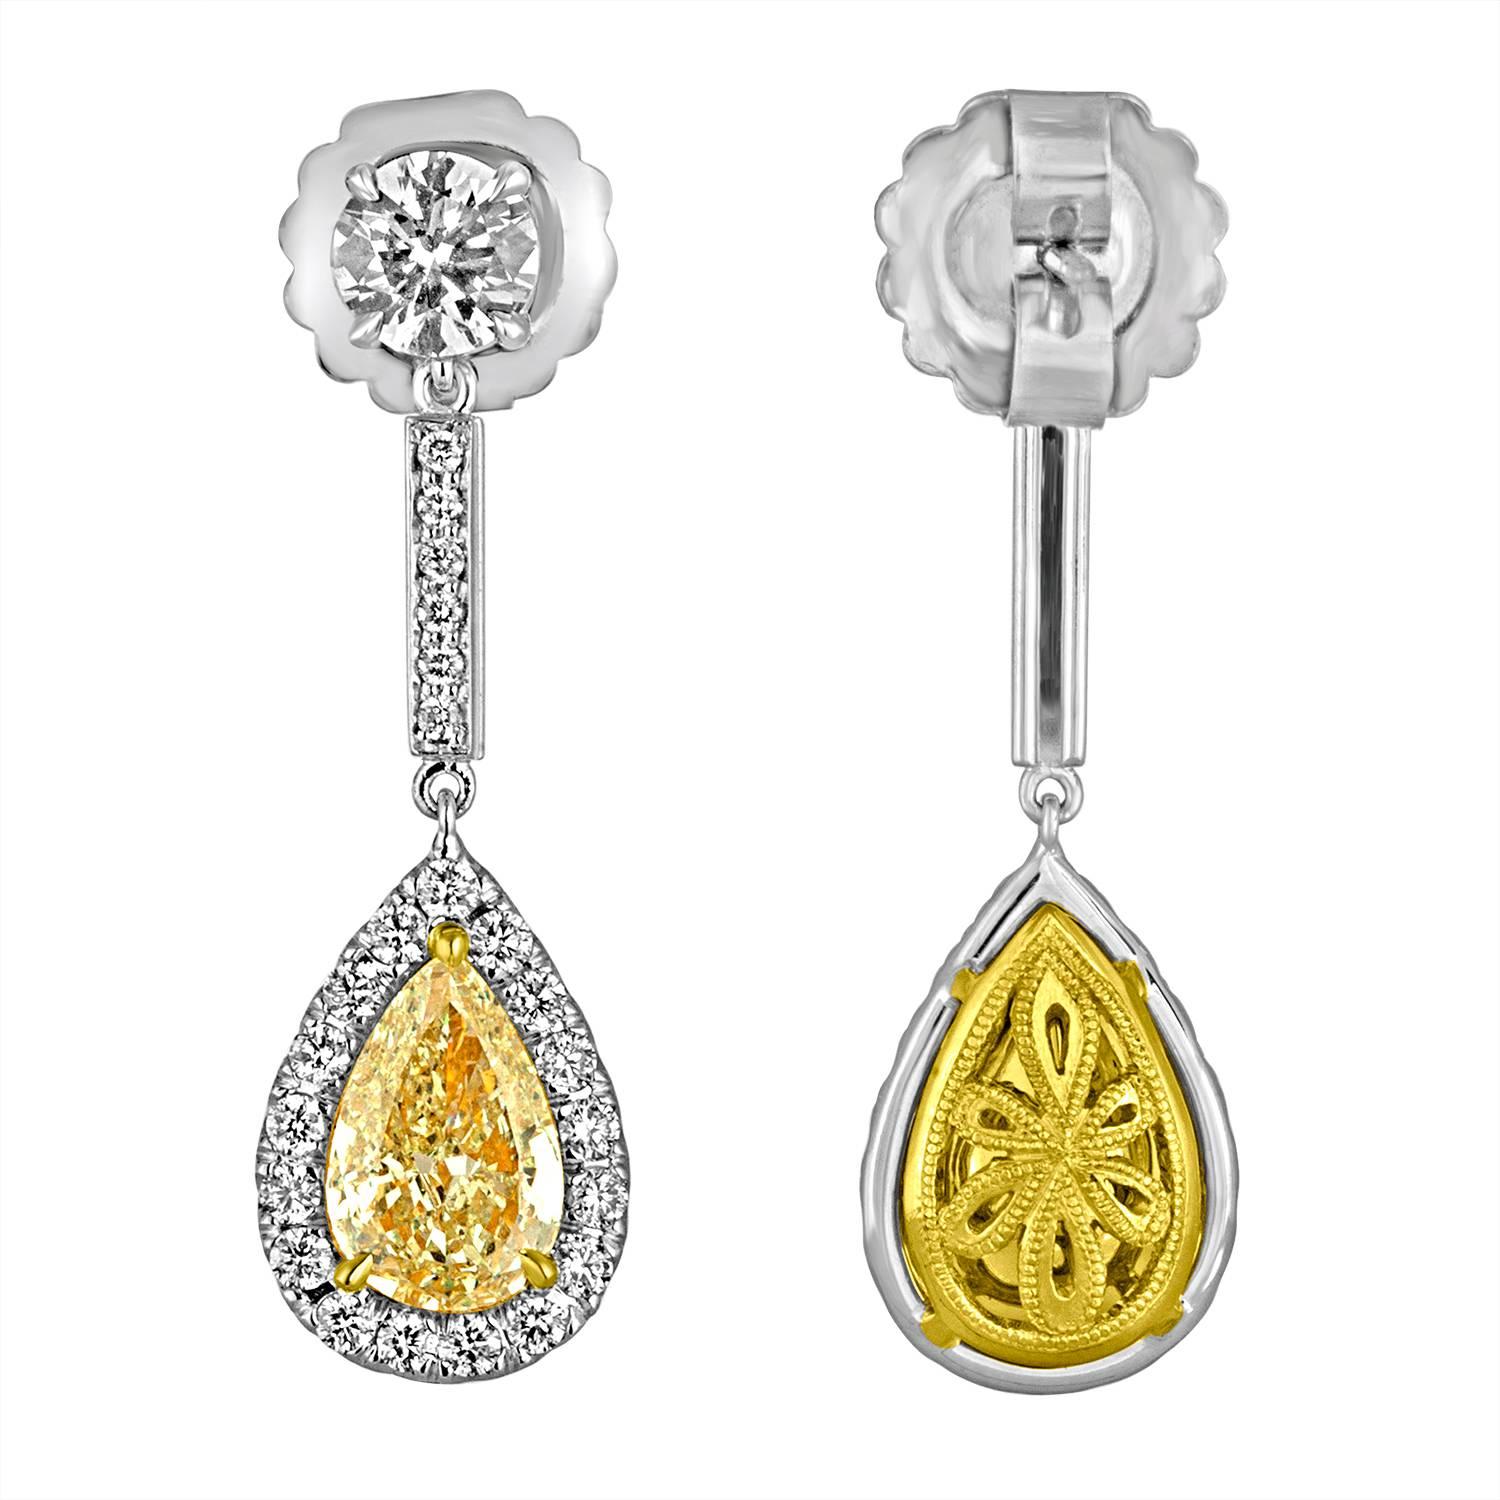 A pair of Simple, Beautiful and yet very Classic Pear Shape Earrings. Two Pear Shapes, 4.03 Carat Total Weight of Yellow Pear Shape Diamonds are set in Two Tone Mounting, 18K Yellow Gold and 18K White Gold with a pair of Brilliant Diamonds on top,